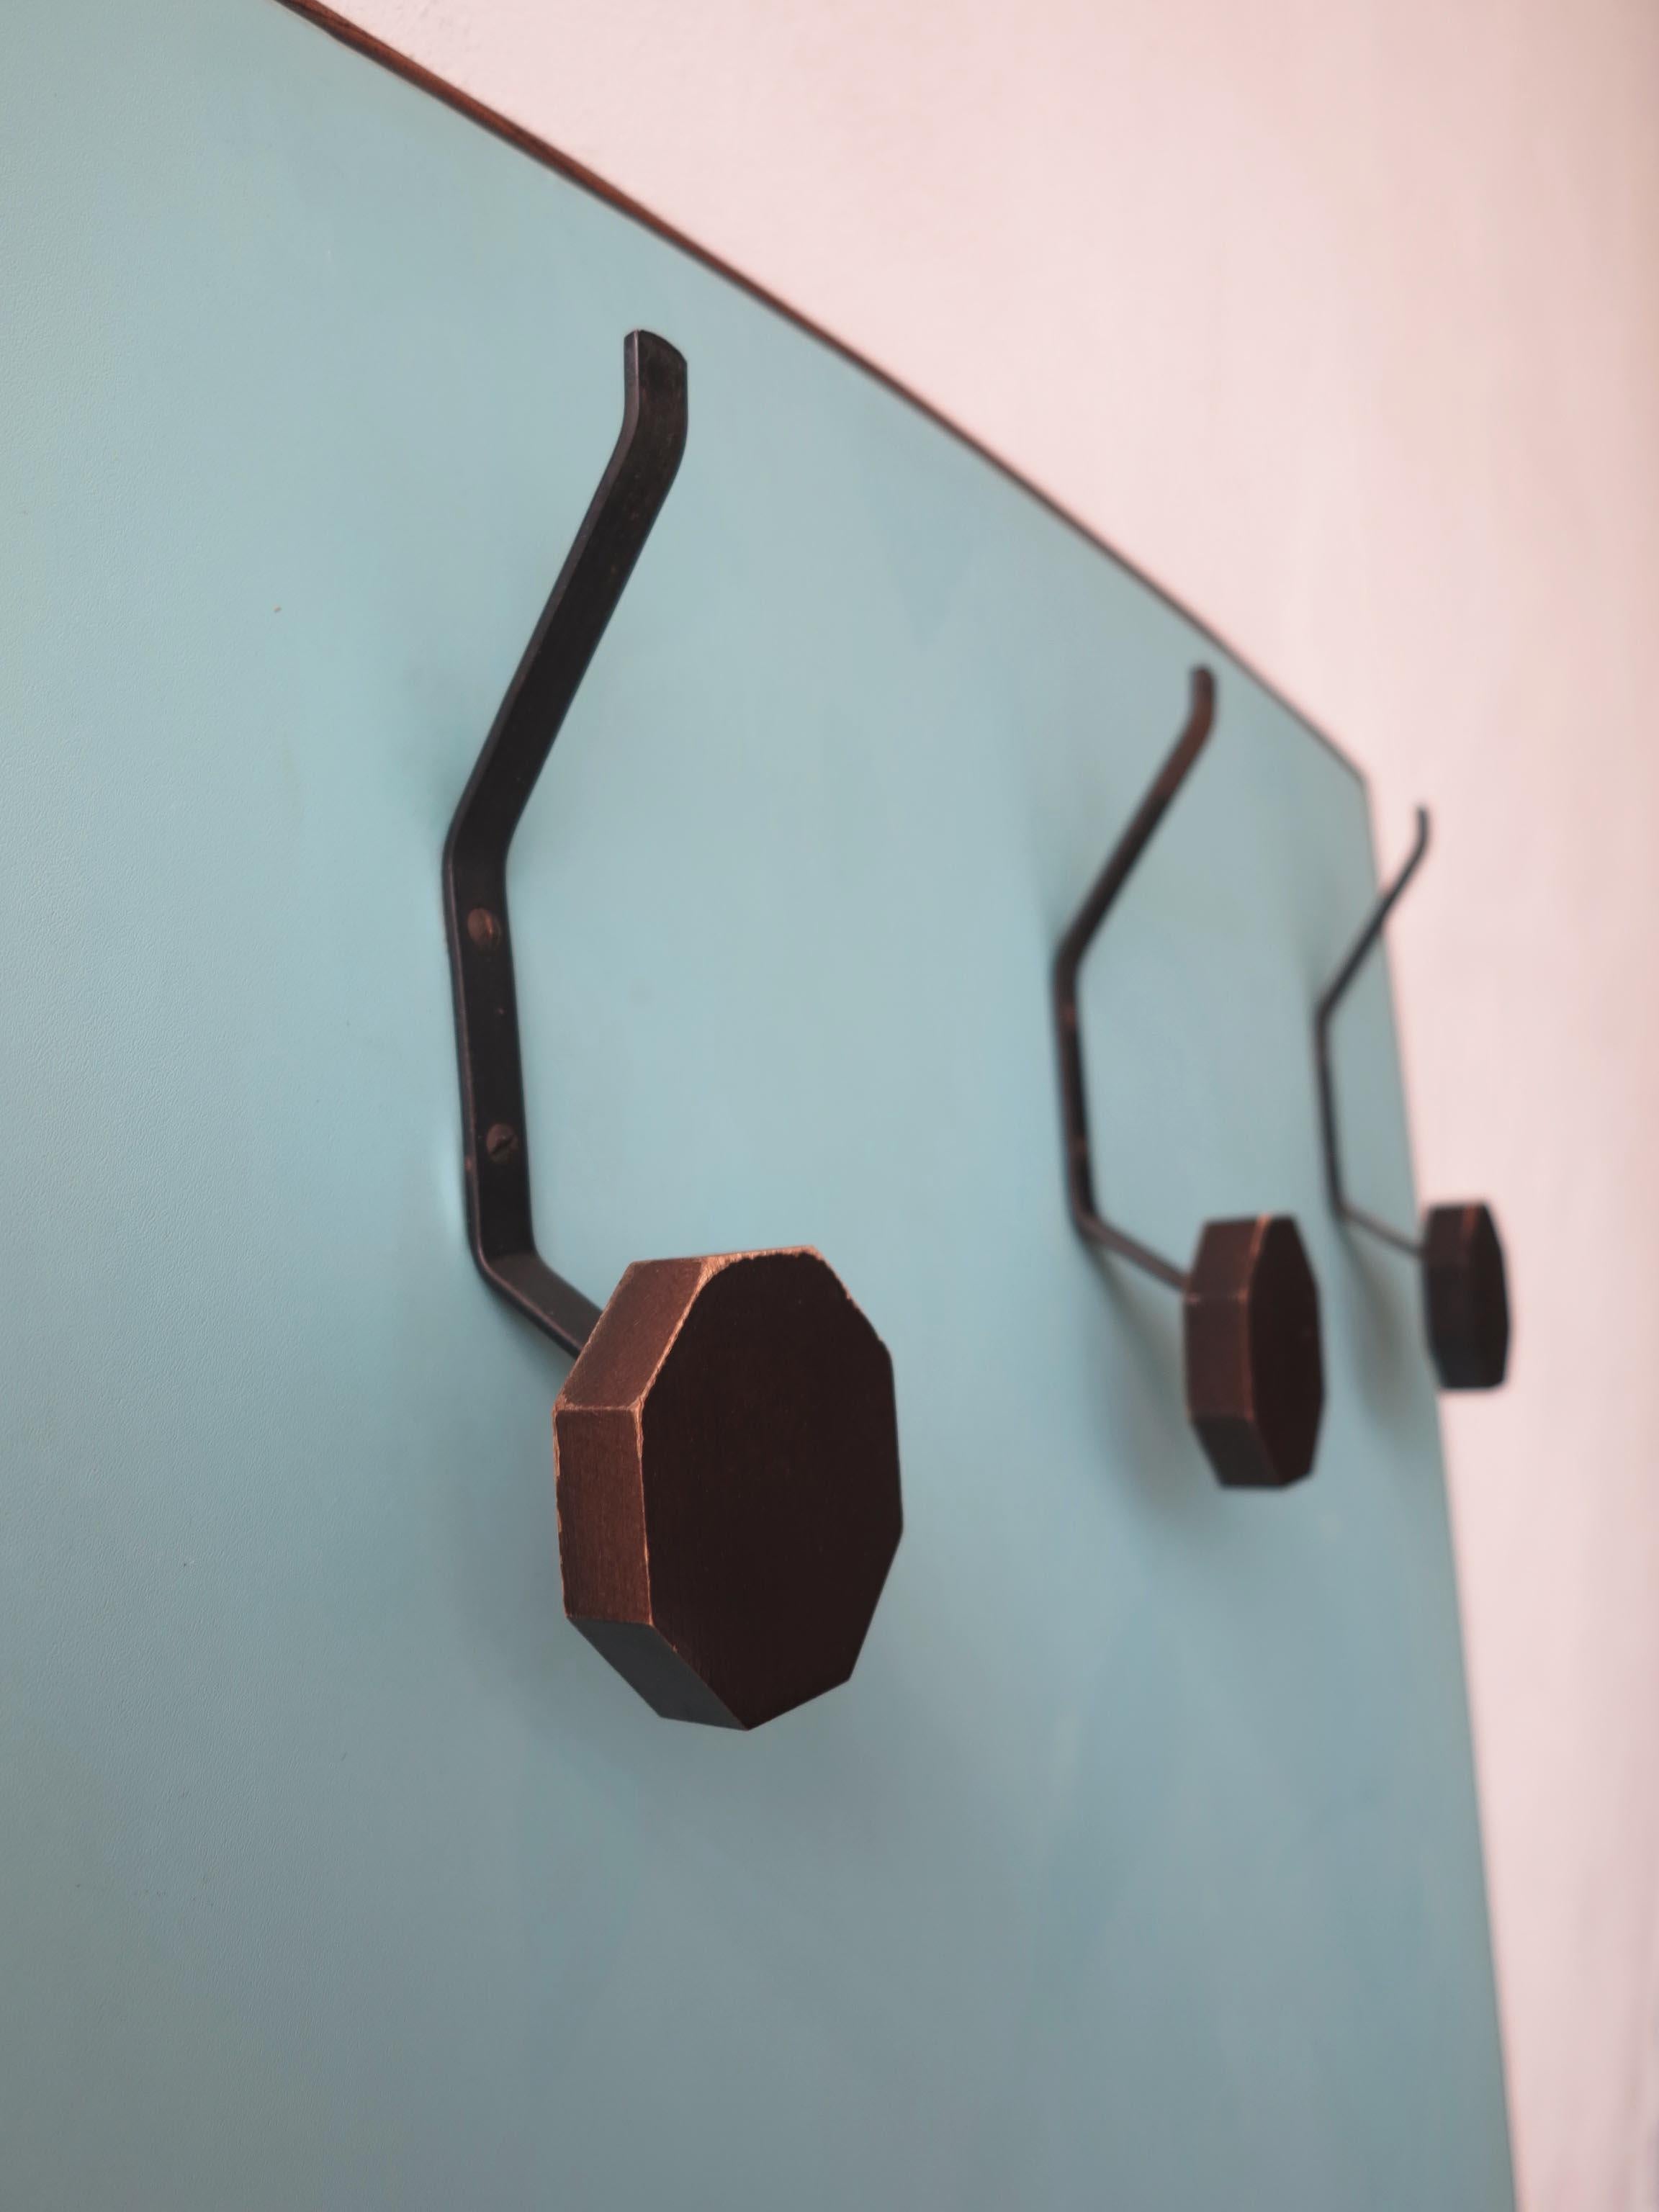 Coat Rack with Mirror and Persian Motif on Original Eco-Friendly Leather, 1950s (Mitte des 20. Jahrhunderts)